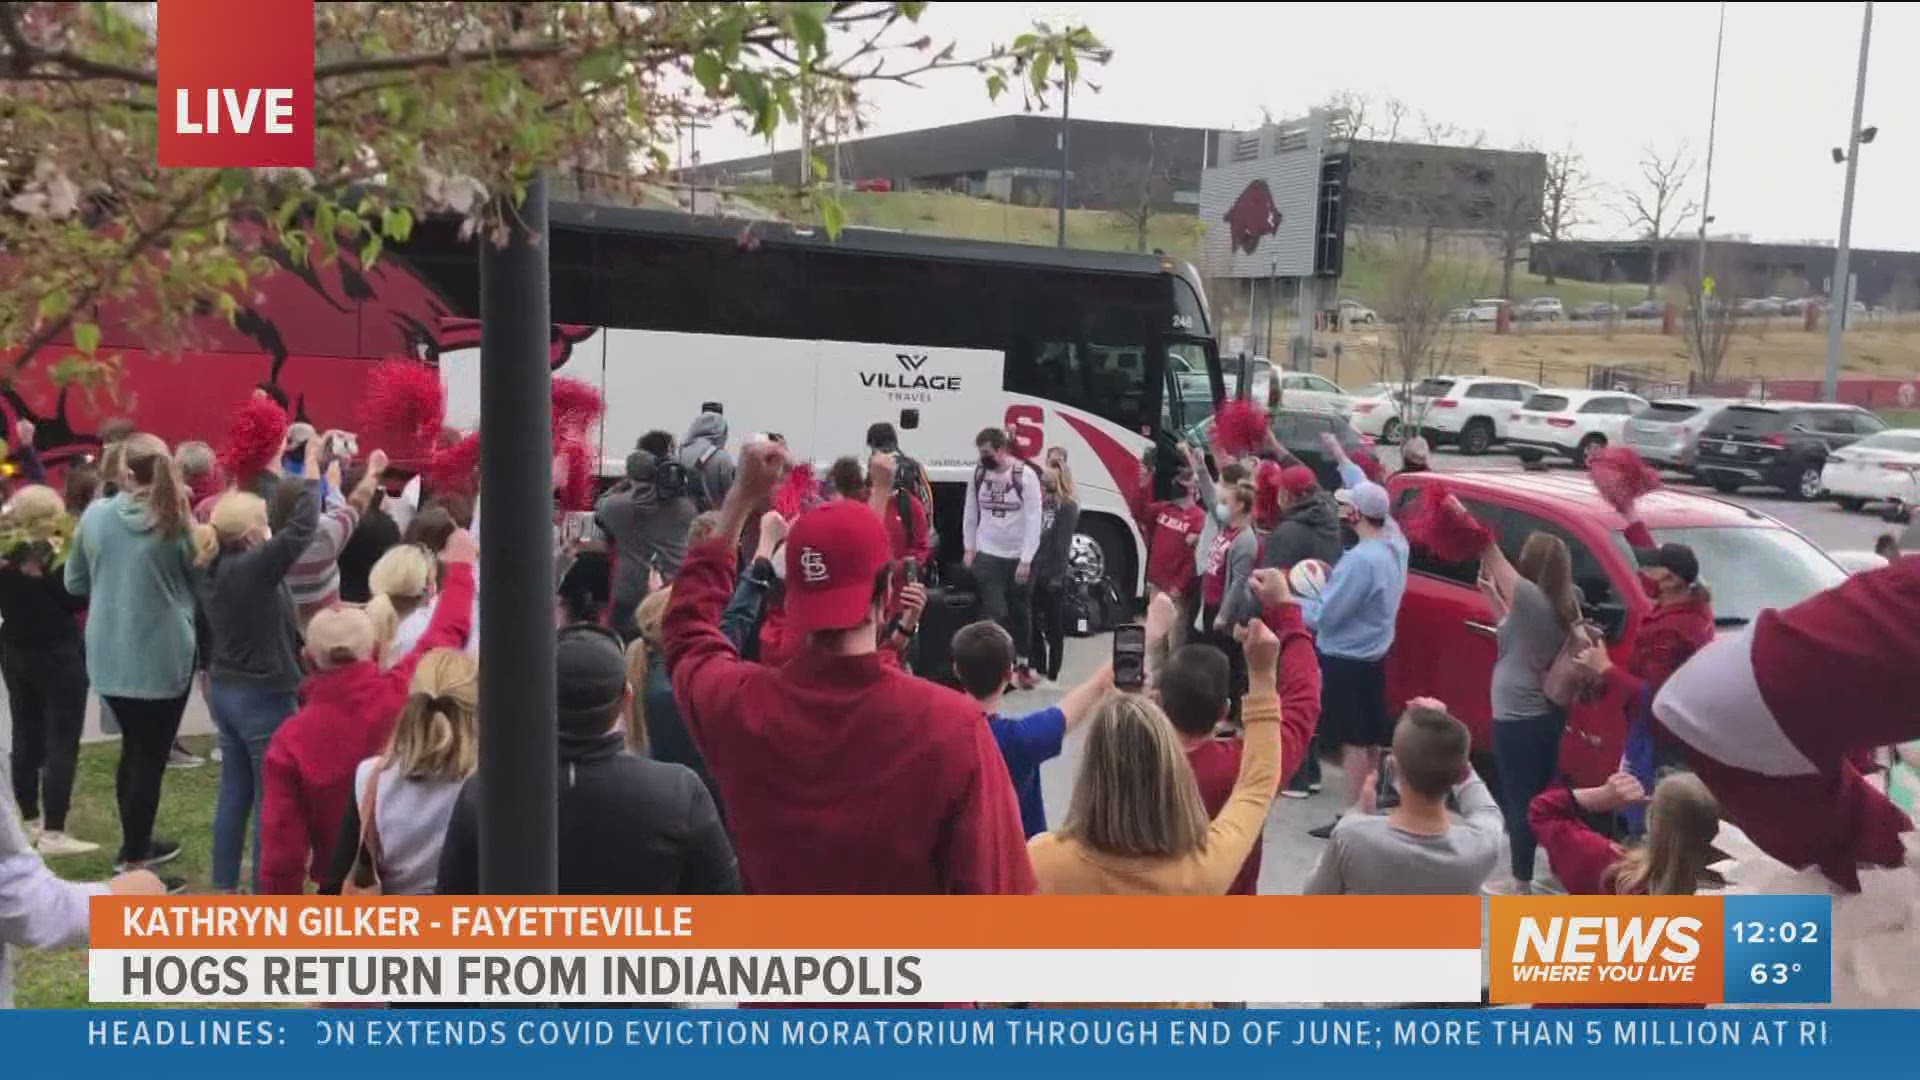 Fans lined up to greet the Arkansas men's basketball team following their run in the NCAA tournament.